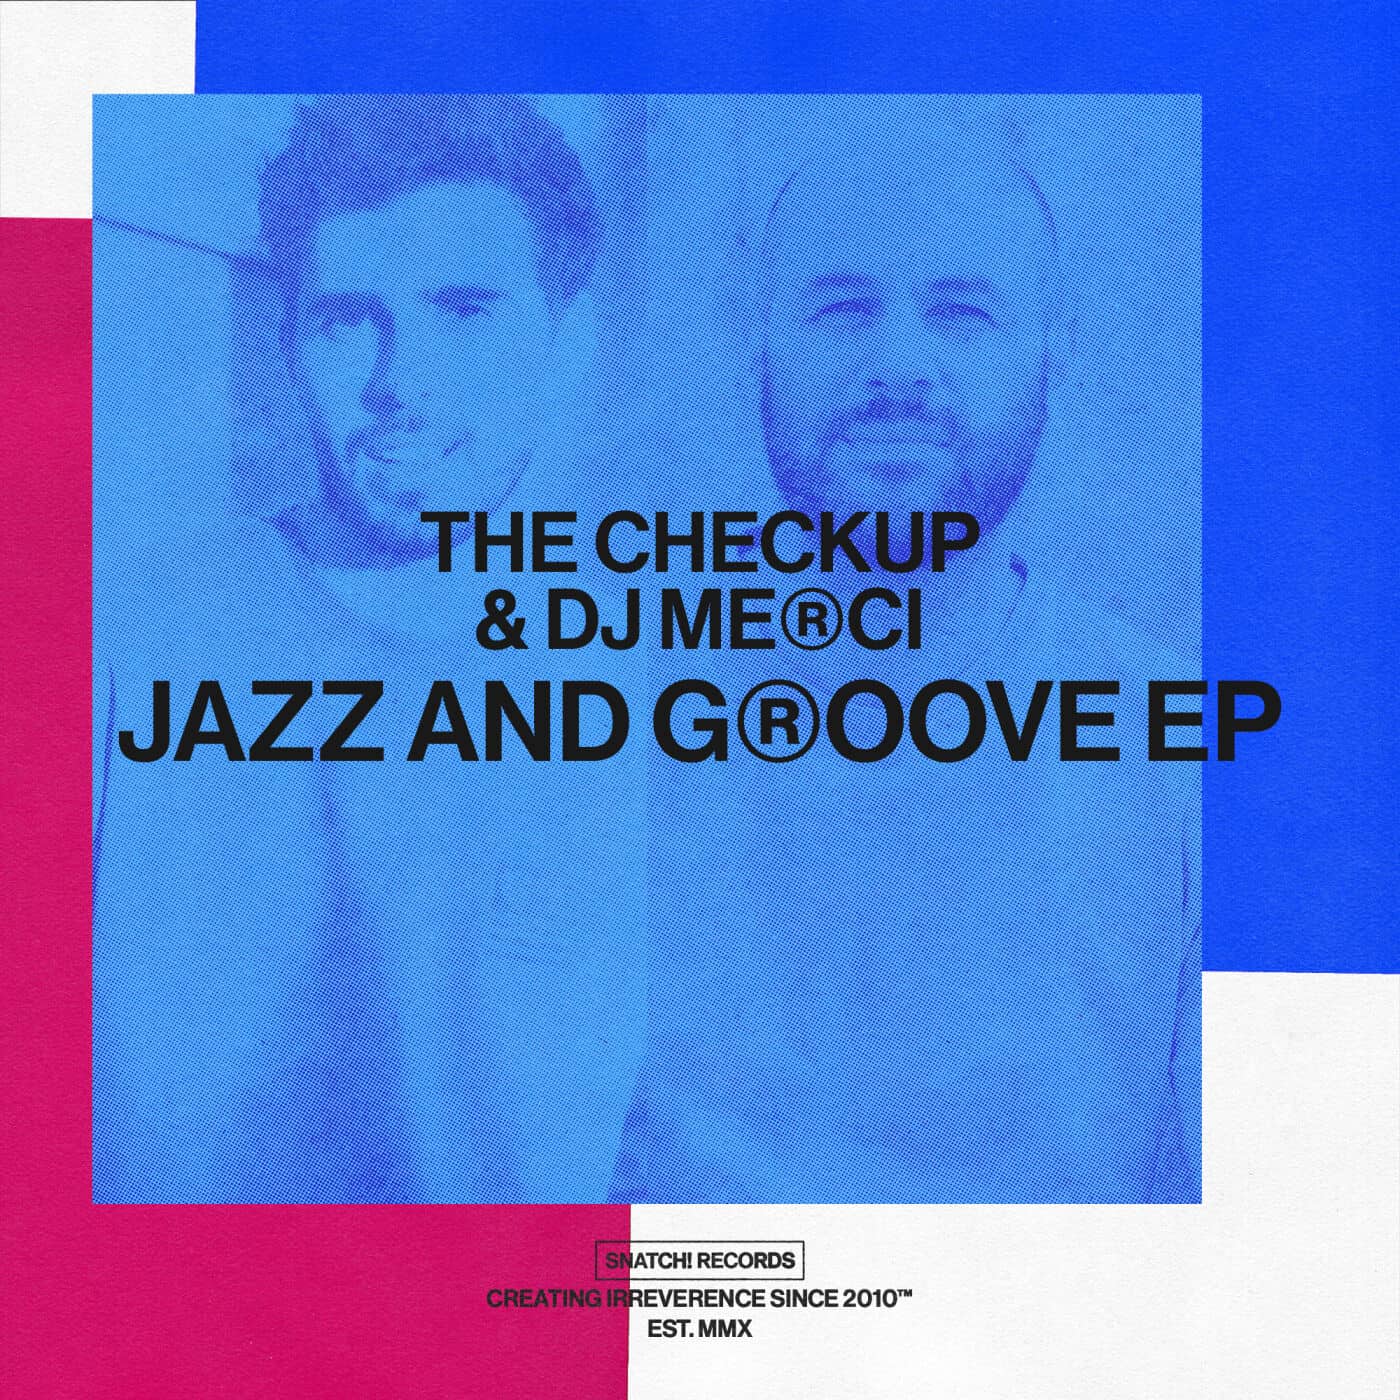 image cover: The Checkup - Jazz and Groove EP by Snatch! Records